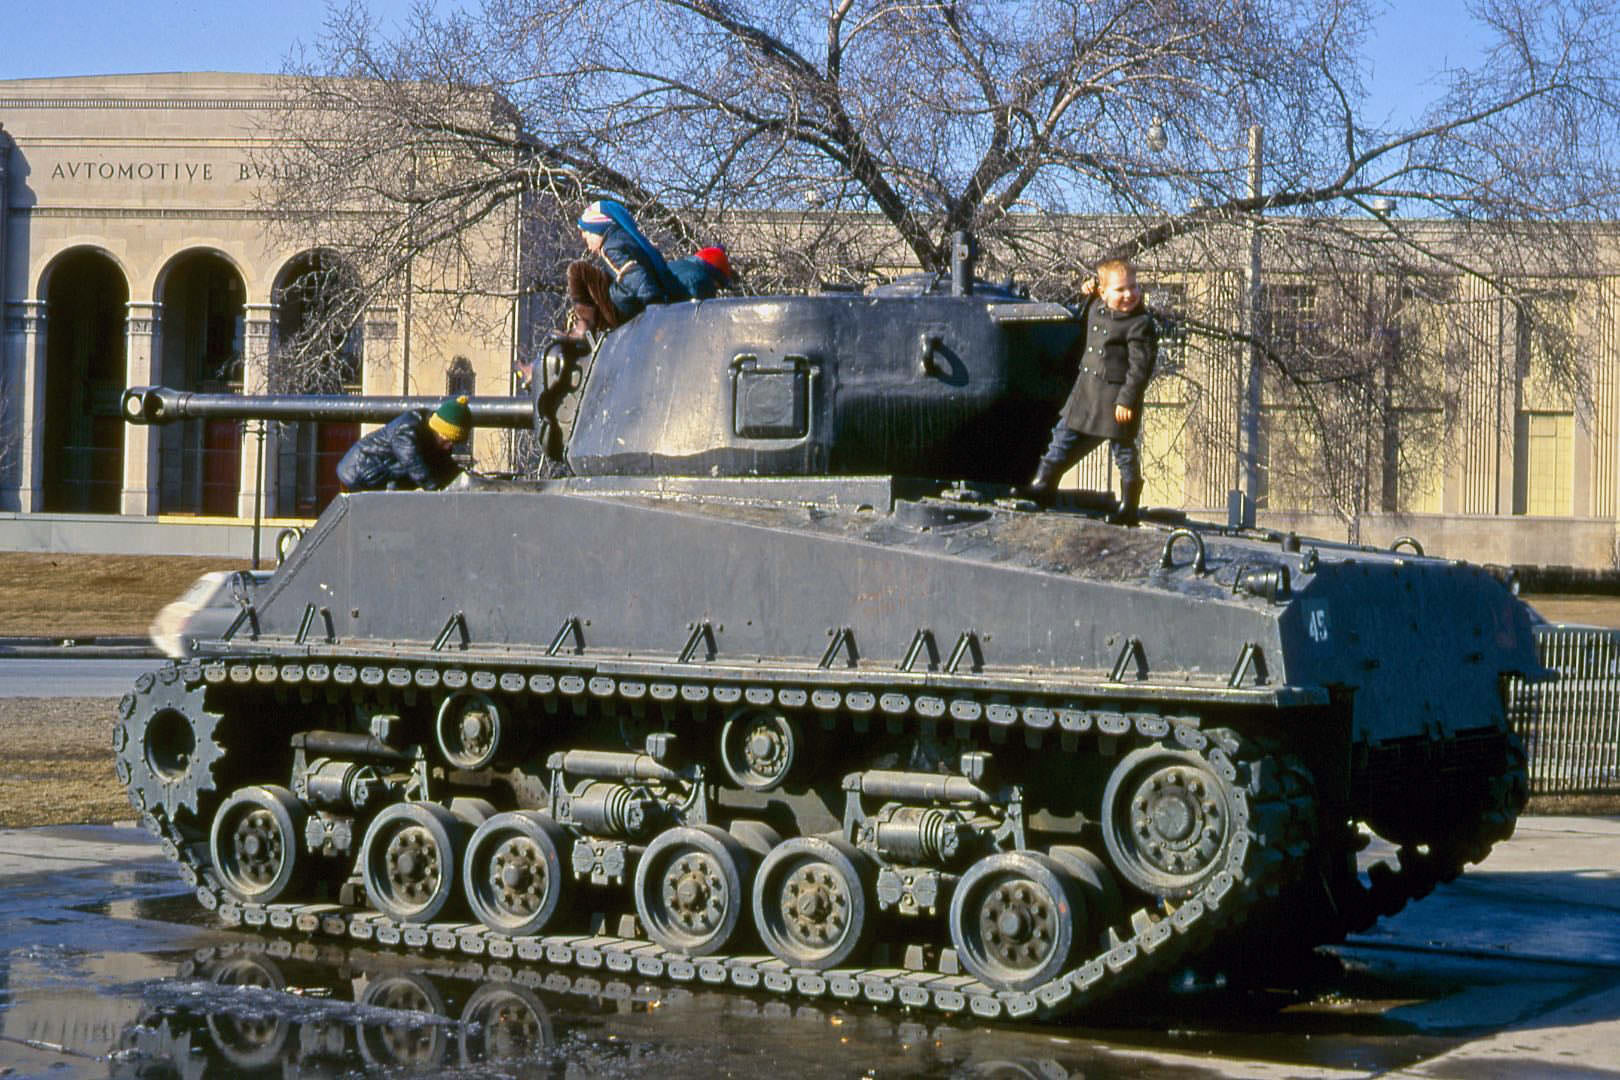 Kids play on a retired Sherman tank, across the street from the Automotive Building, 1970